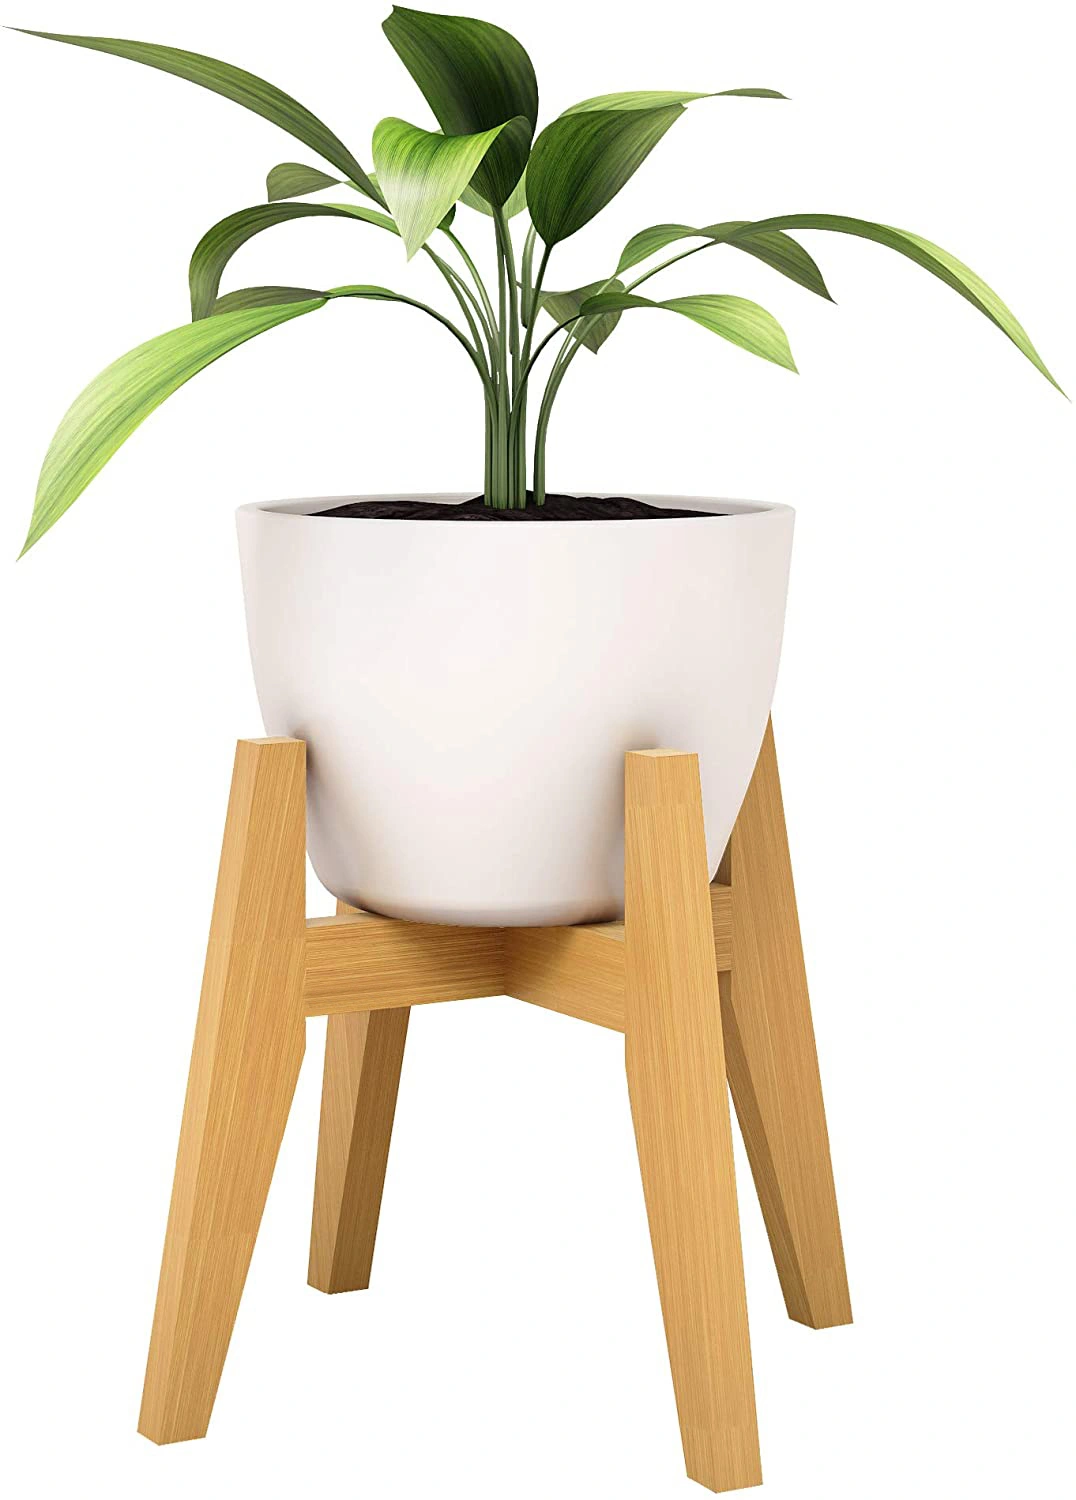 Adjustable Bamboo Flower Holder Plant Stand For Home